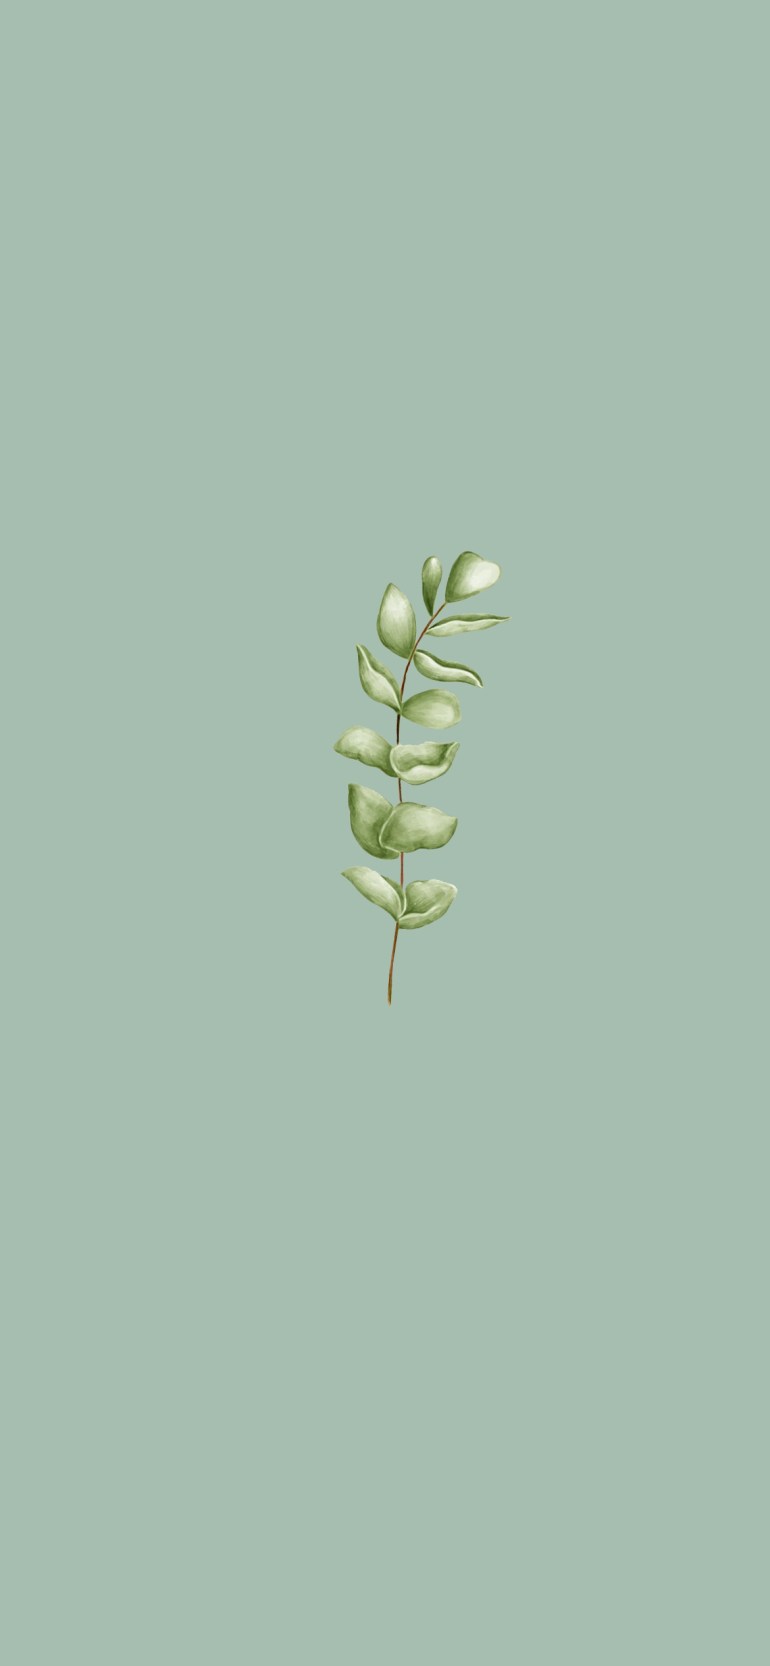 A minimalist greenery phone wallpaper with a green leaf on a light green background - Sage green, simple